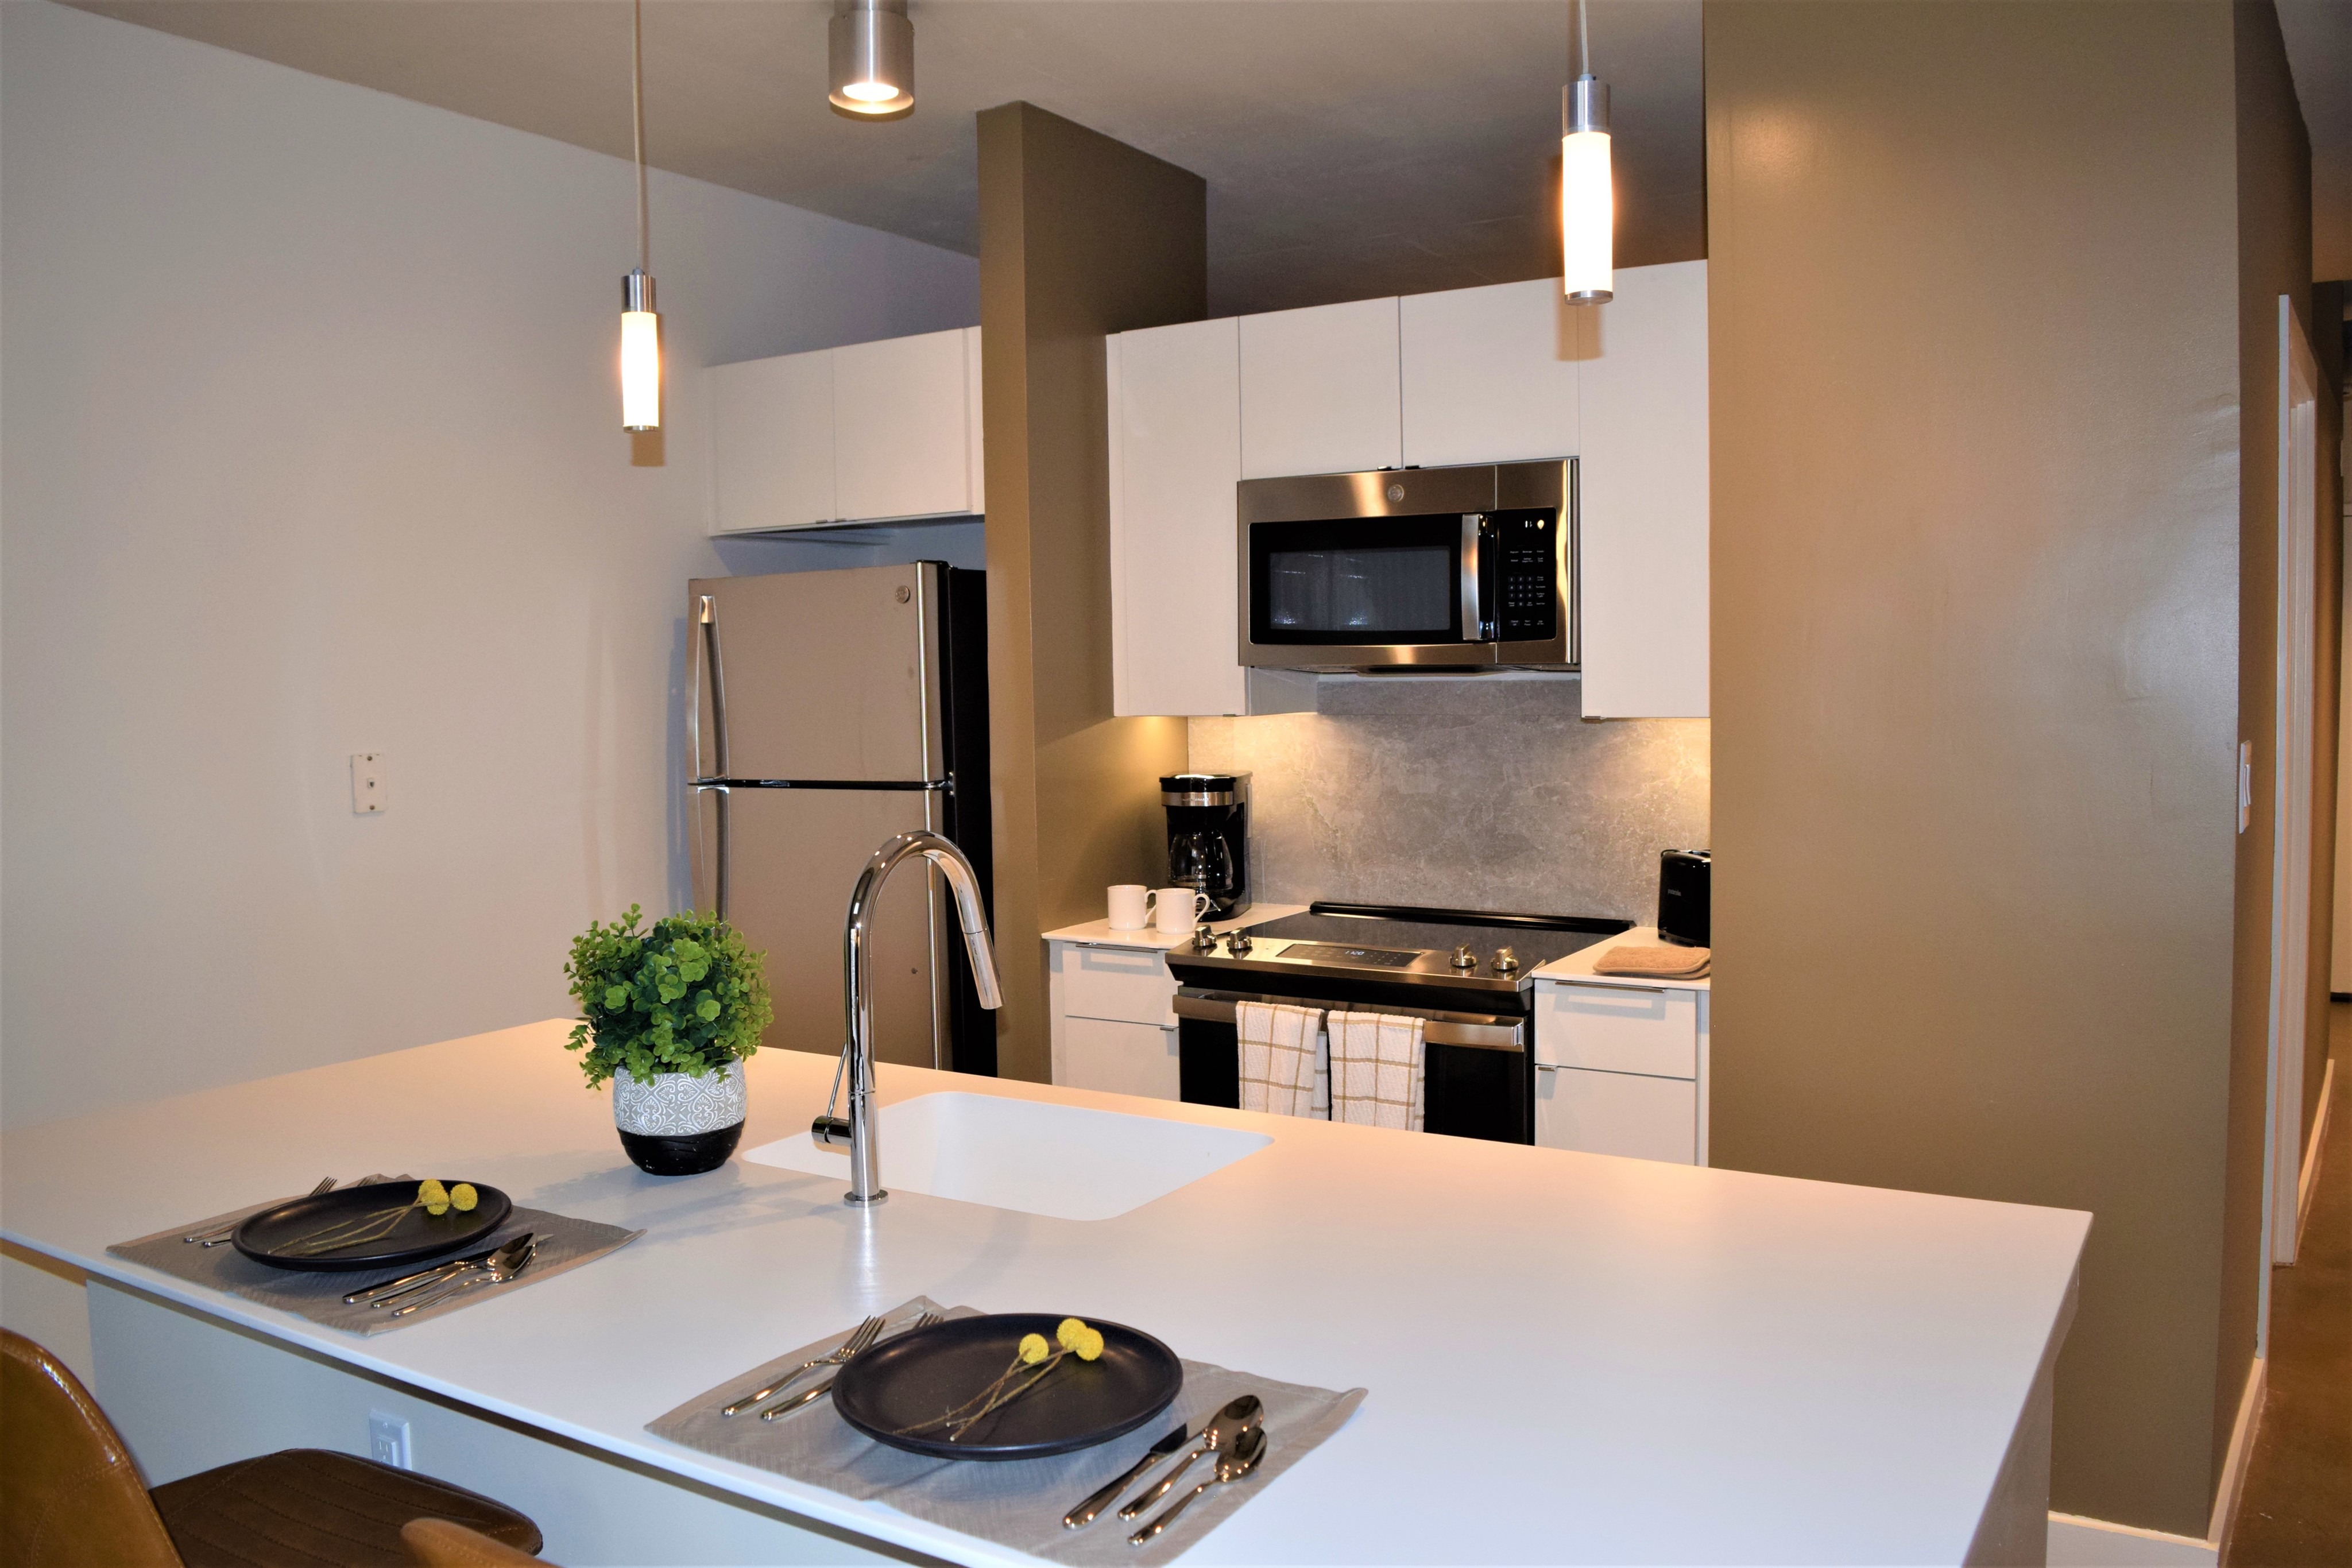 Image of Newly Renovated Apartment |  Park Triangle Apartments | Columbia Heights Apartments | Washington DC Apartments